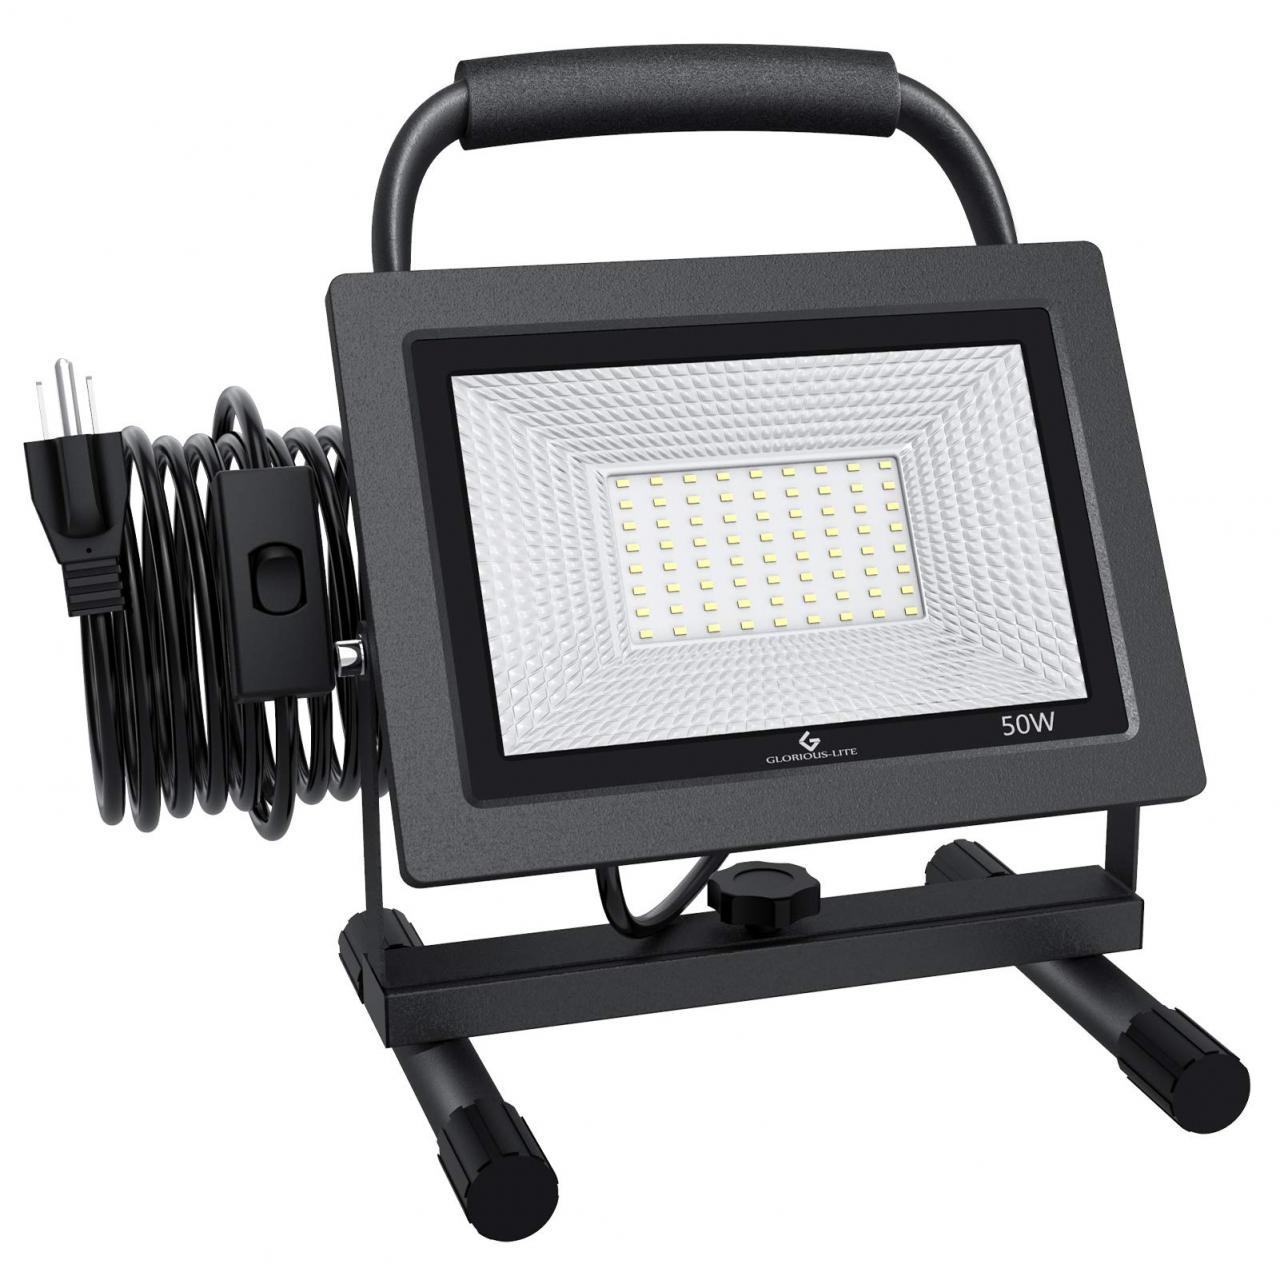 GLORIOUS-LITE 50W LED Work Light, 5000LM LED Flood Lights, 400W Equivalent,  IP66 Waterproof, 16ft 5m Cord with Plug, 6500K, Adjustable Working Lights  for Workshop Garage, Construction Site- Buy Online in India at